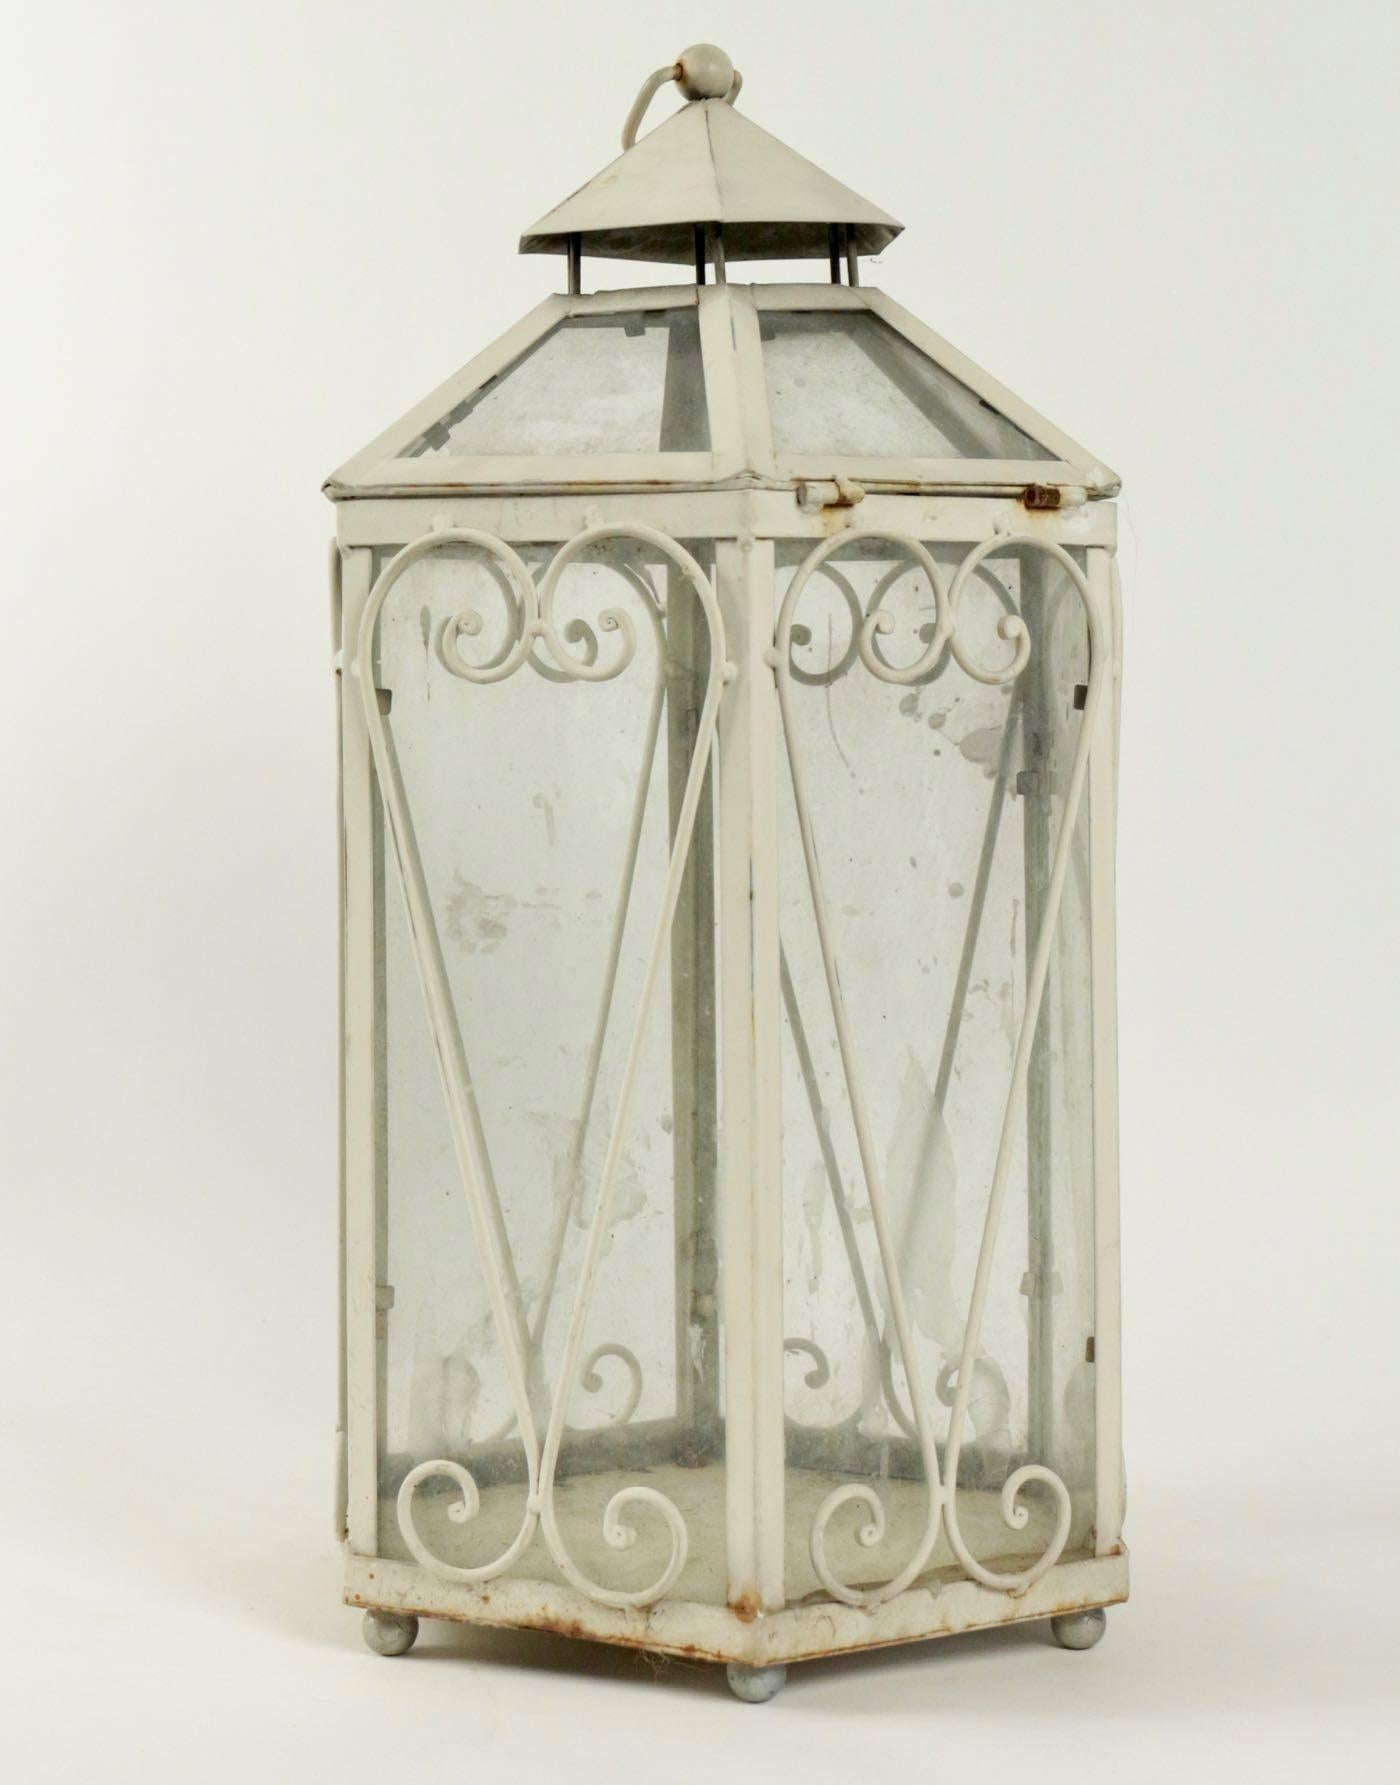 Romantic Wrought Iron Lantern in the Shape of a Miniature Greenhouse For Sale